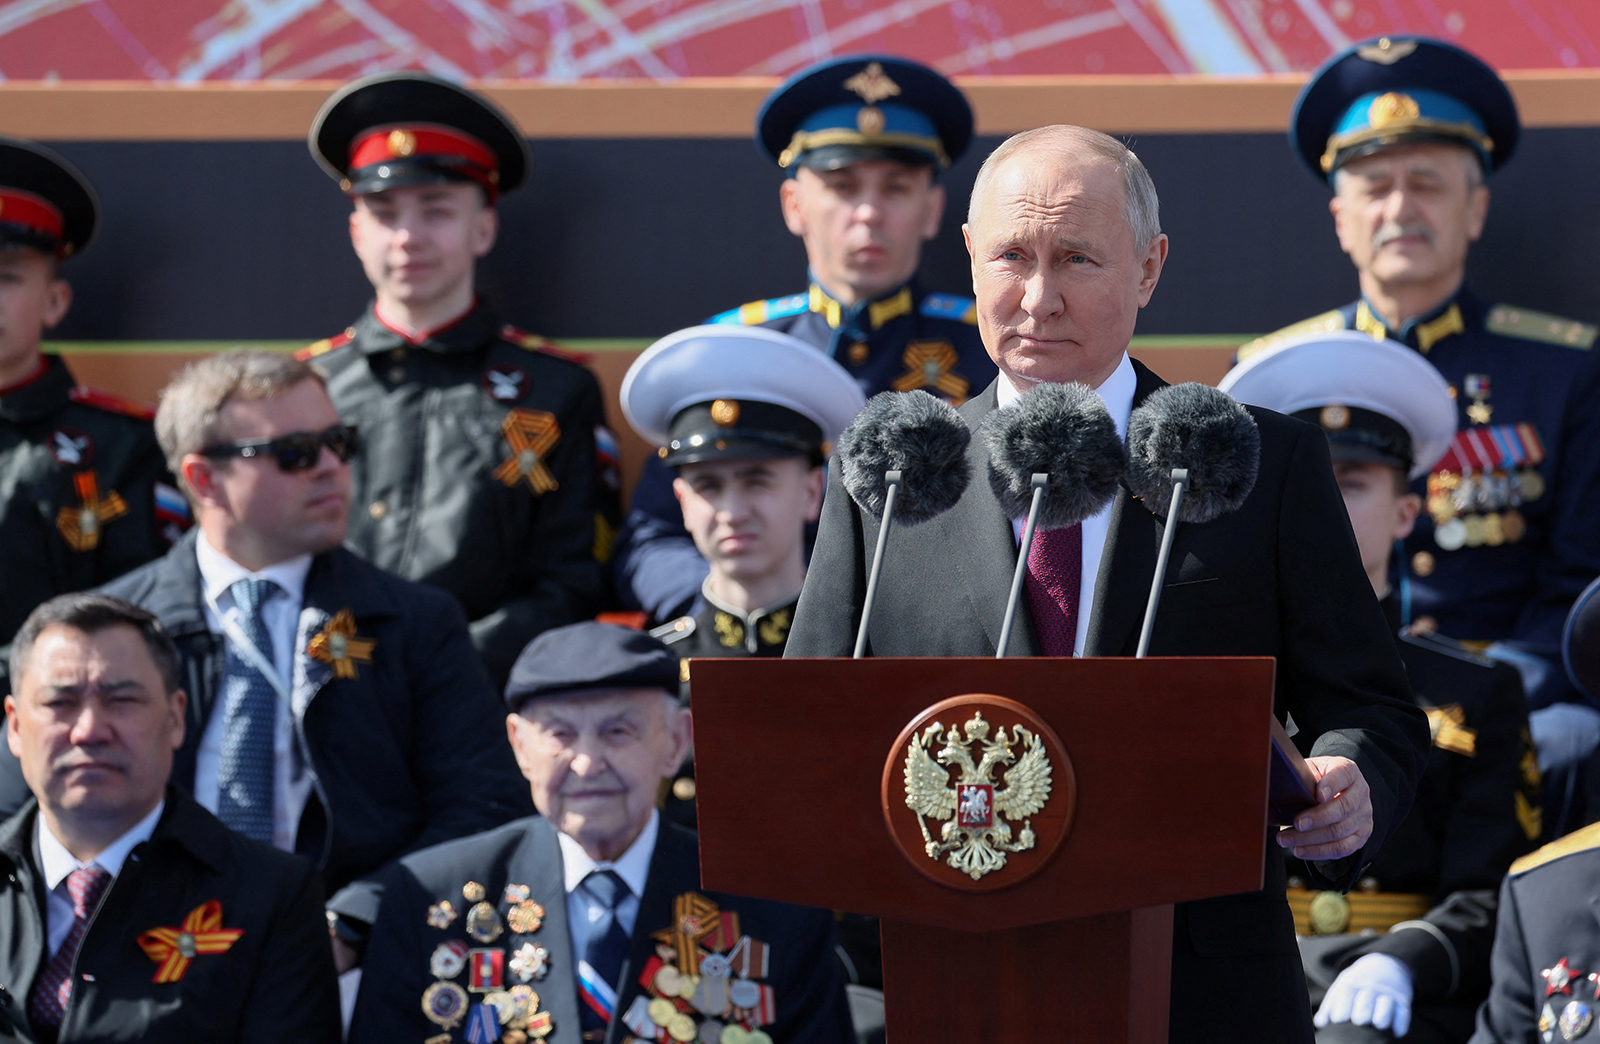 Vladimir Putin delivers a speech during a military parade on Victory Day, which marks the 78th anniversary of the victory over Nazi Germany in World War Two, in Red Square in central Moscow, on May 9.